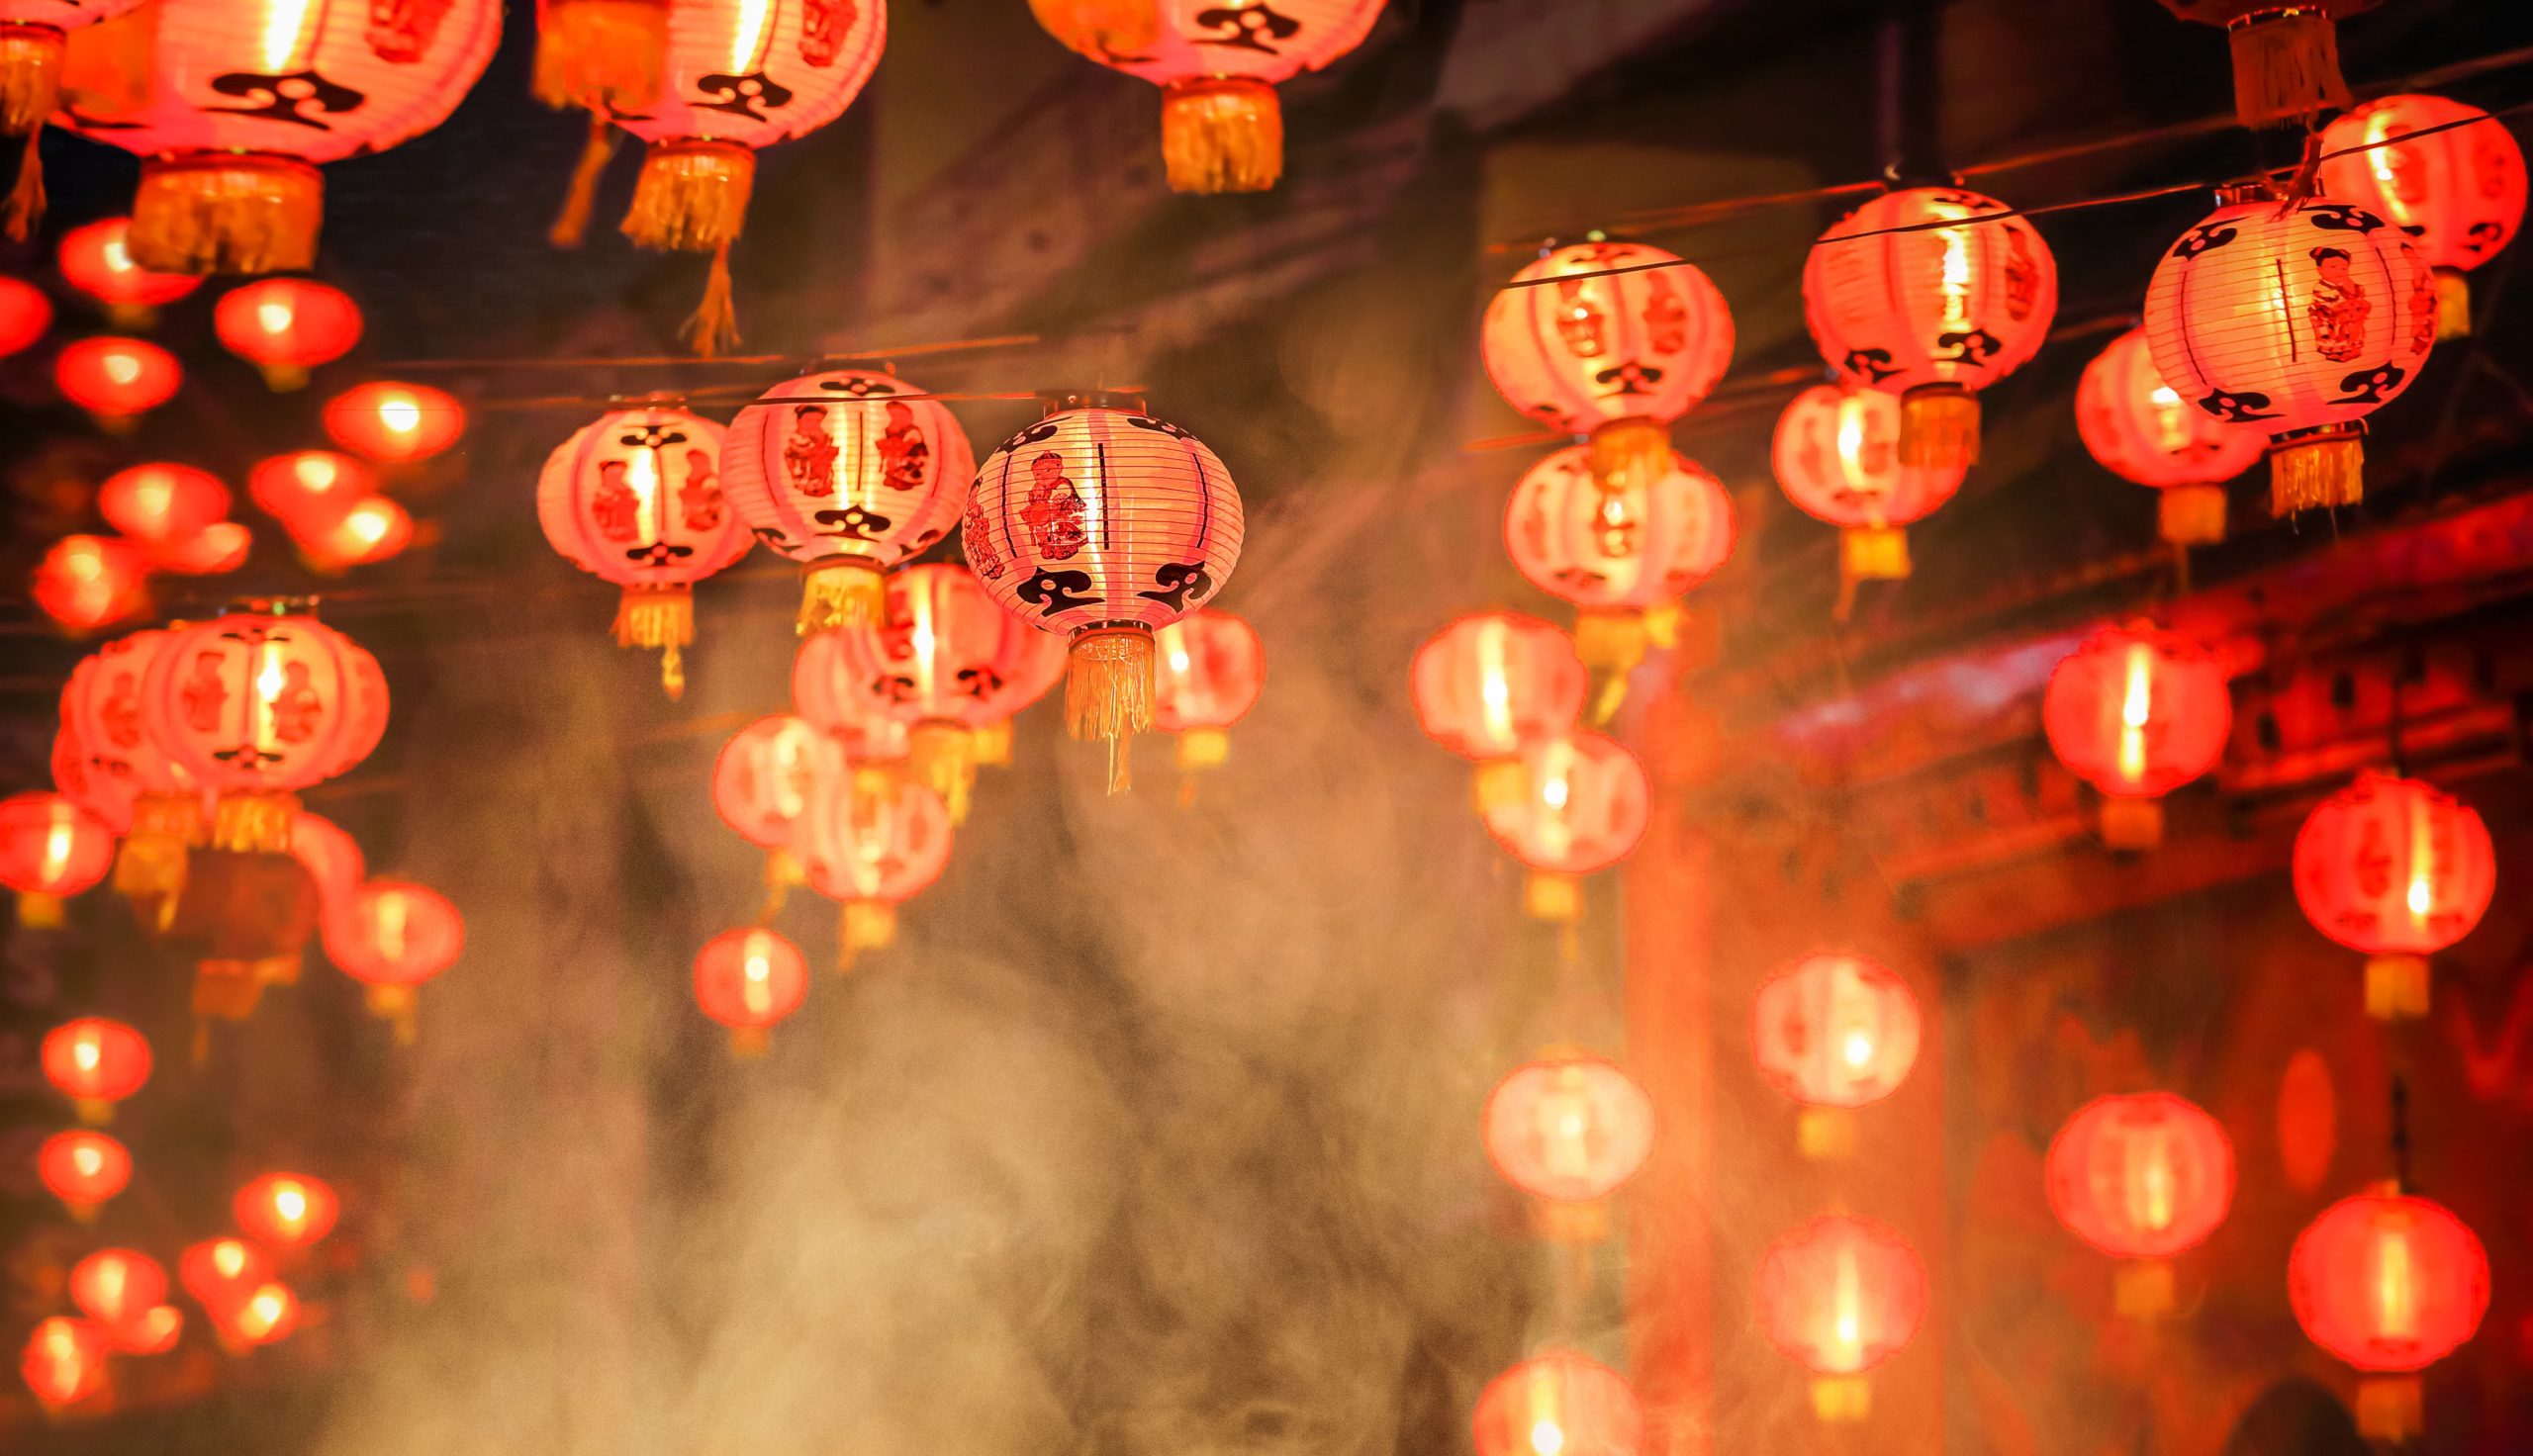 Why Your Company Should Run a Chinese New Year Media Campaign